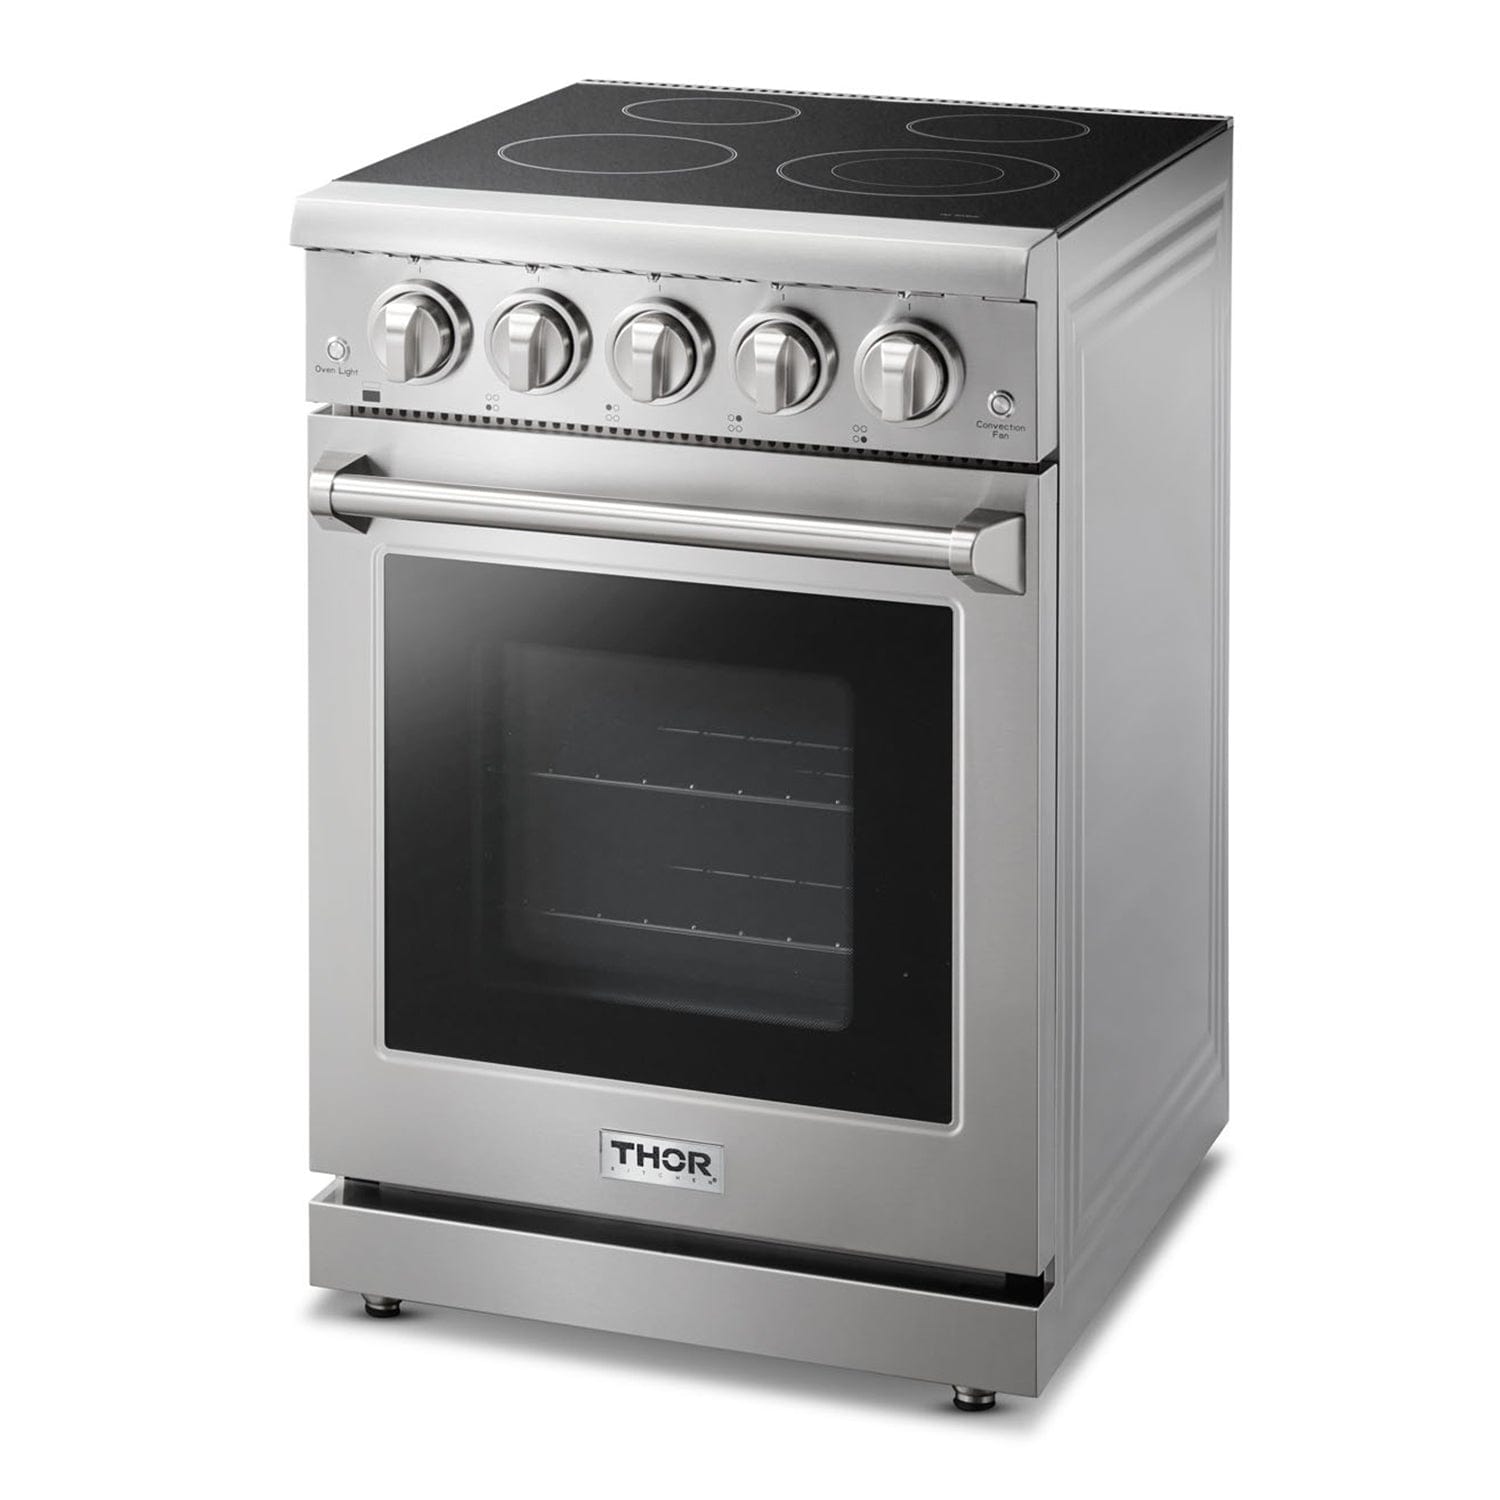 Thor Kitchen 24 in. Professional Electric Range in Stainless Steel HRE2401 Ranges HRE2401 Luxury Appliances Direct